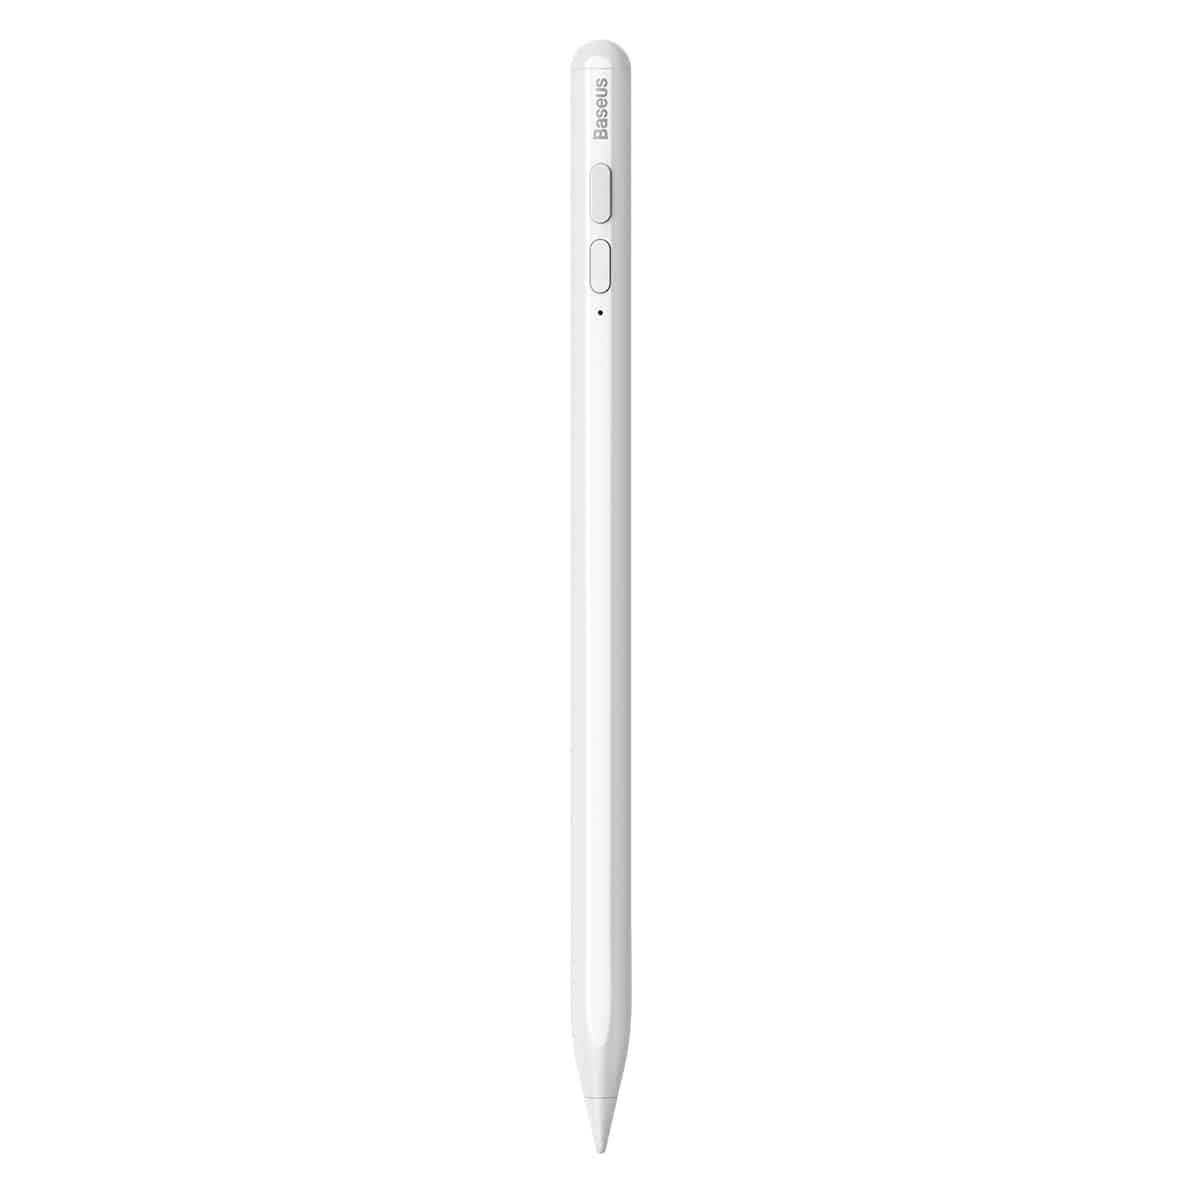 Baseus Penchang Capacitive Handwriting Pen (Active Version+Anti Misoperation) White (Including: Simple Universal Data Cable Type-c 3A 0.5m White*1+Active Head*1)